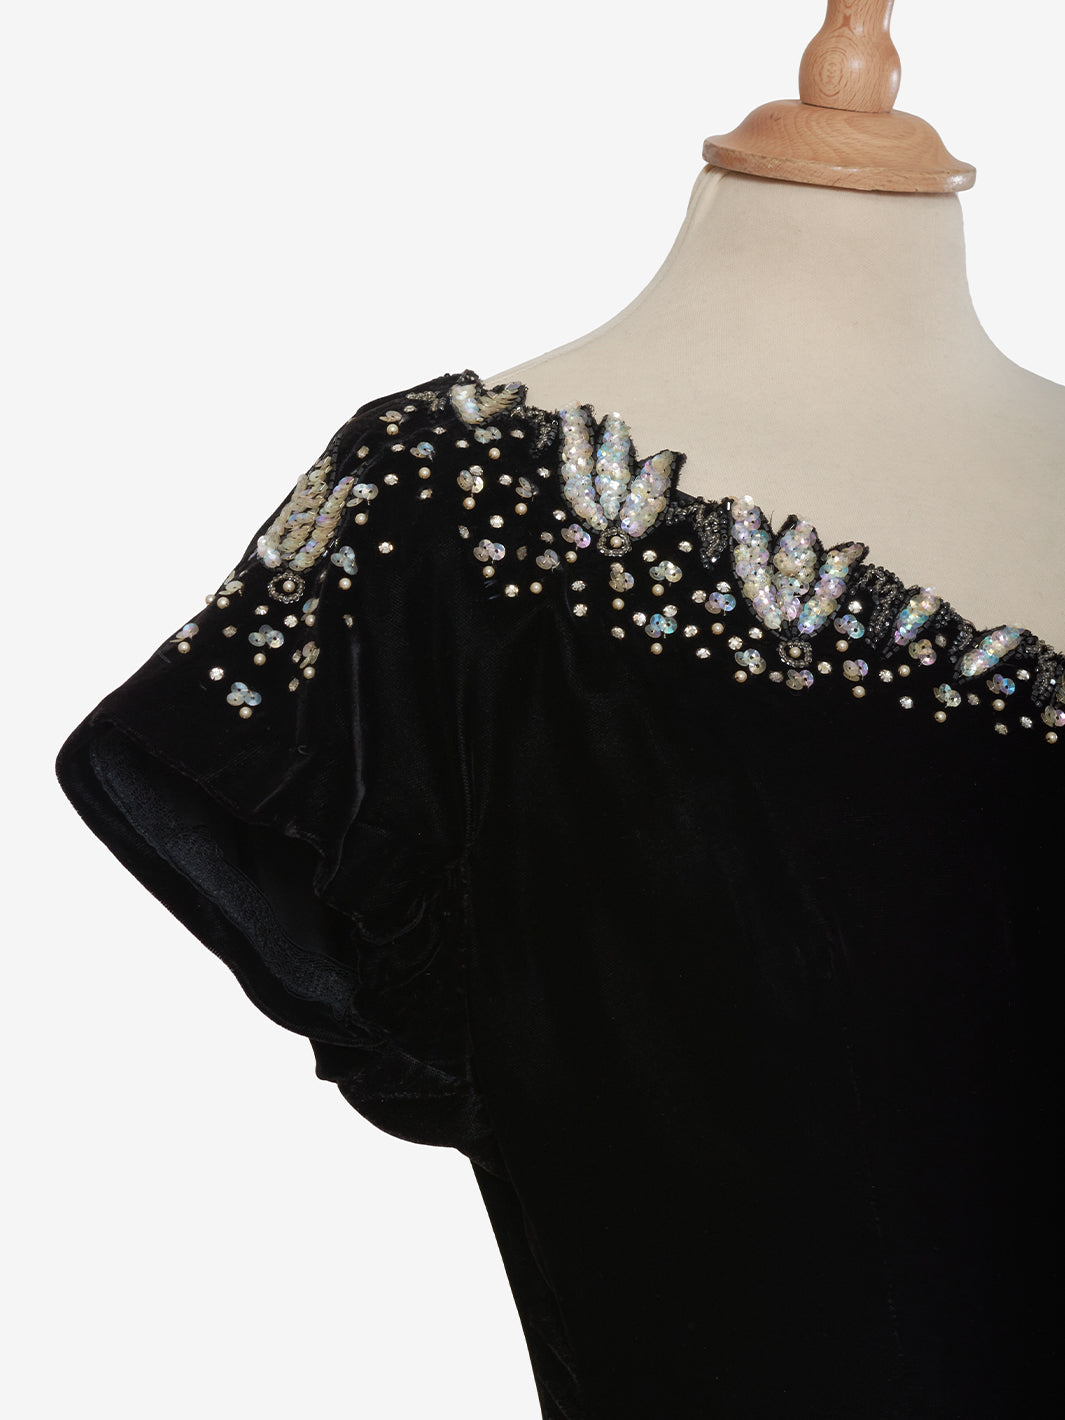 Vintage velvet dress with sequin embroidery - '40s